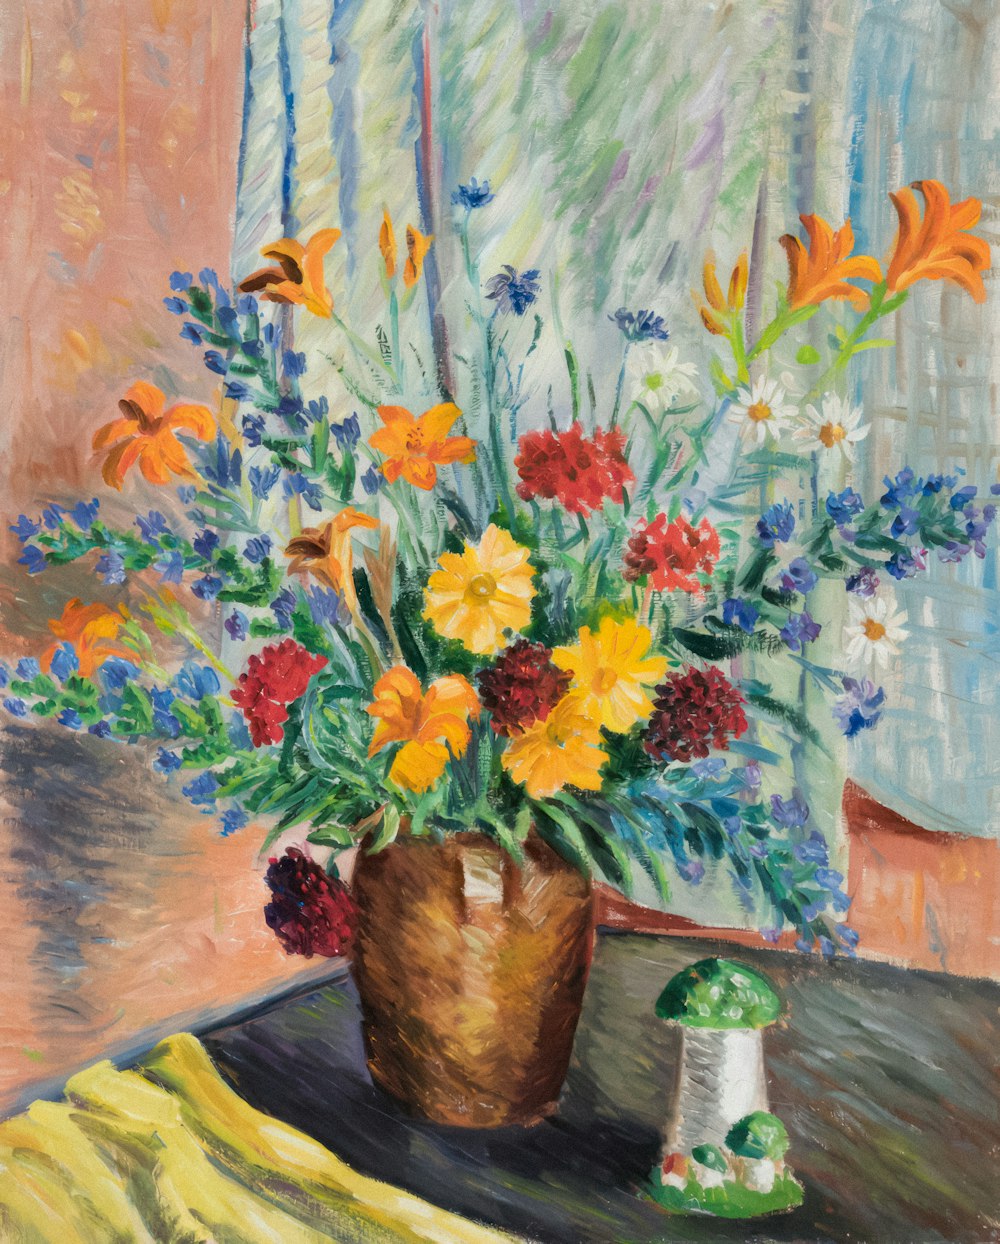 a painting of a vase of flowers on a table